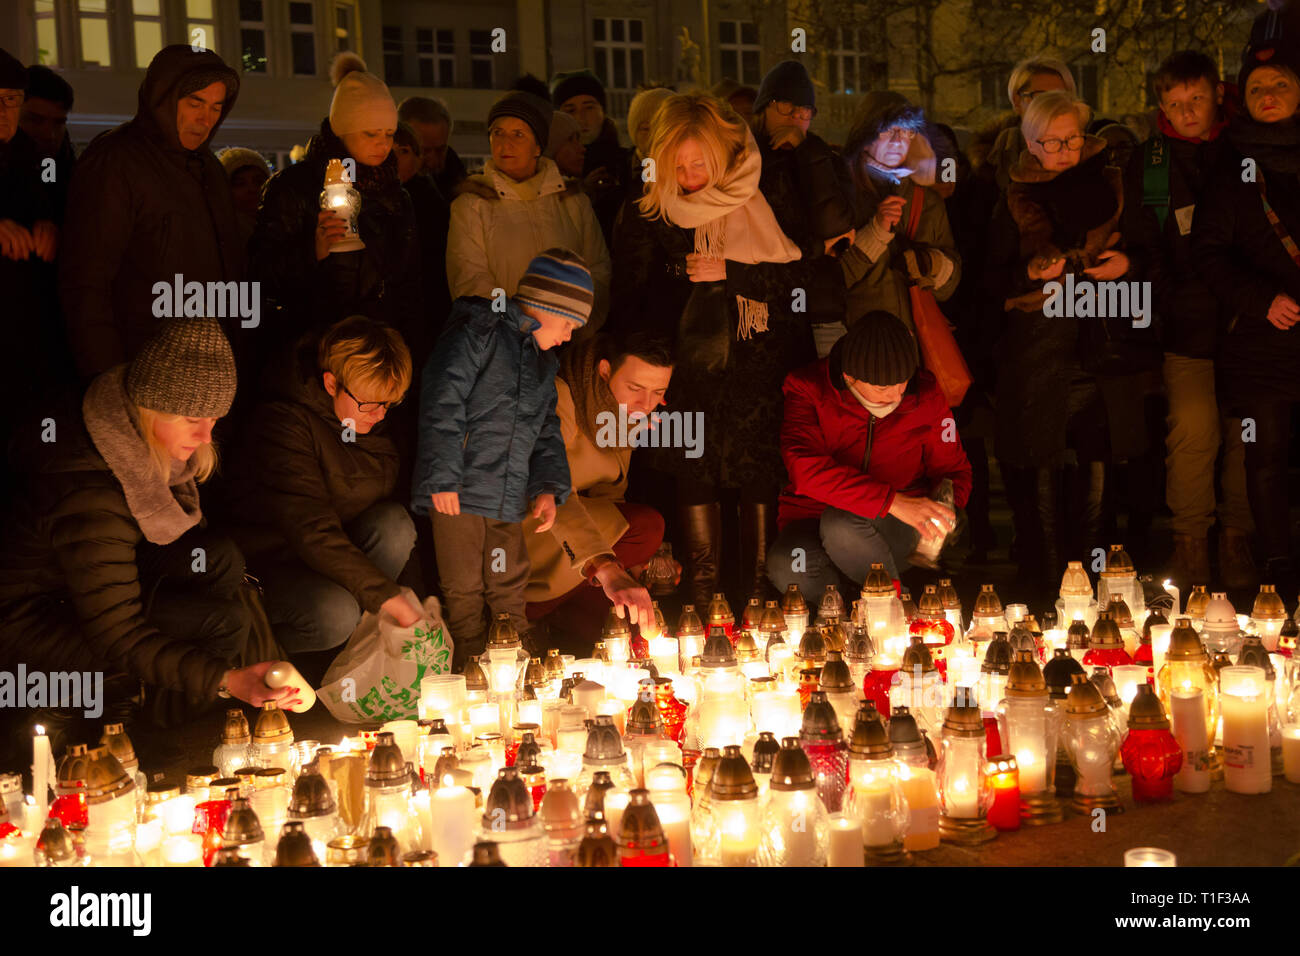 16.01.2019, Poznan, Wielkopolska, Poland - People gather all over Poland on this day in memory of Pawel Adamowicz, the mayor of Gdansk who was murdere Stock Photo